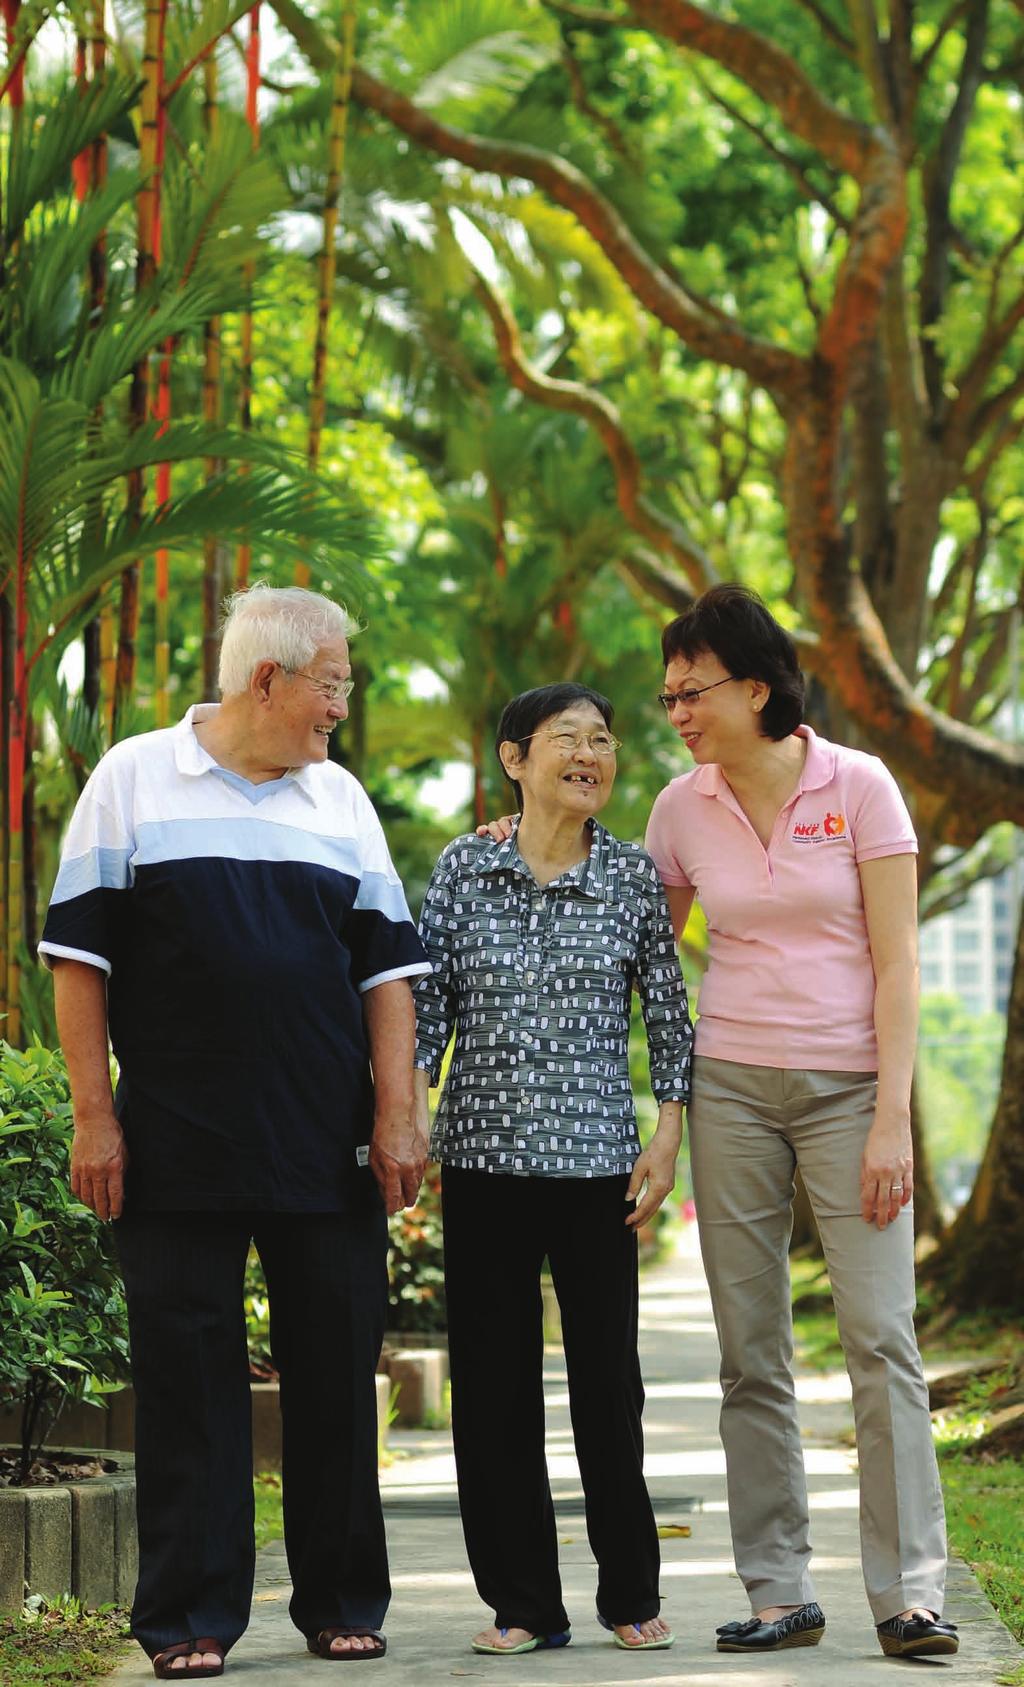 Dialysis Treatment and Care Clinical Launched NKF Peritoneal Dialysis Community Support Programme Peritoneal dialysis (PD) is a home-based therapy.